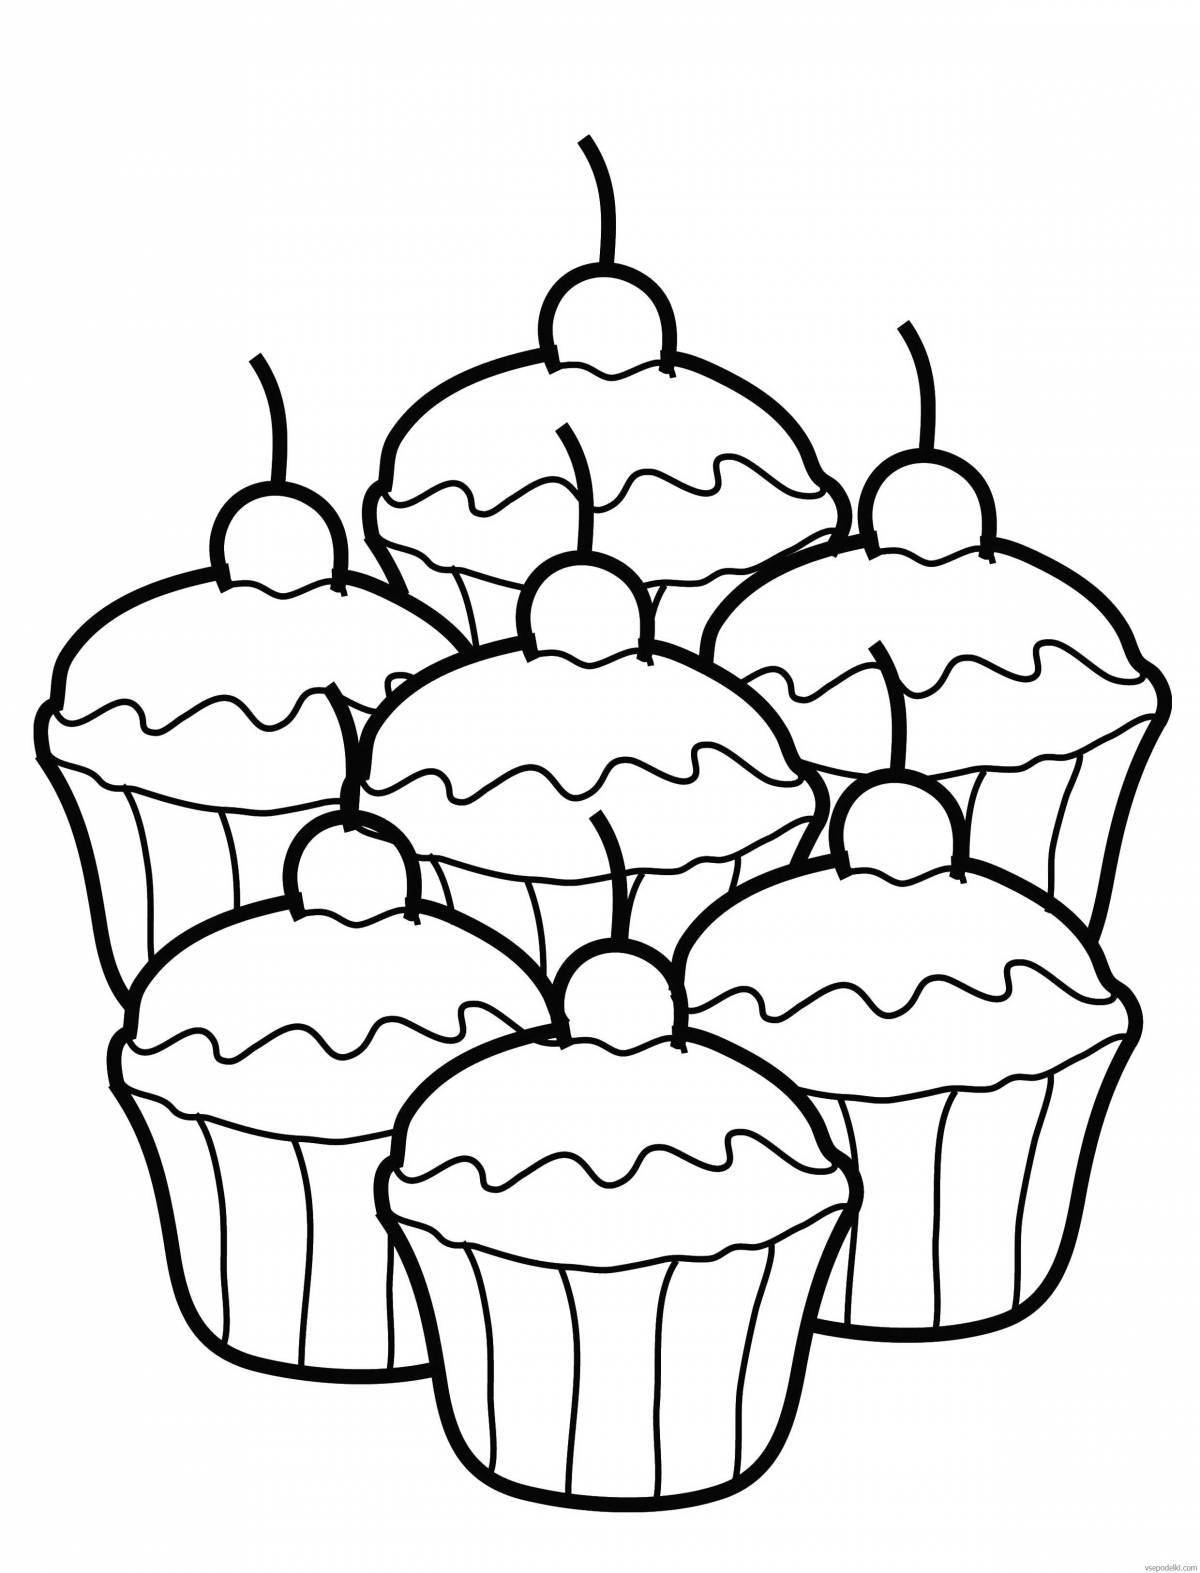 Amazing cupcake coloring pages for kids